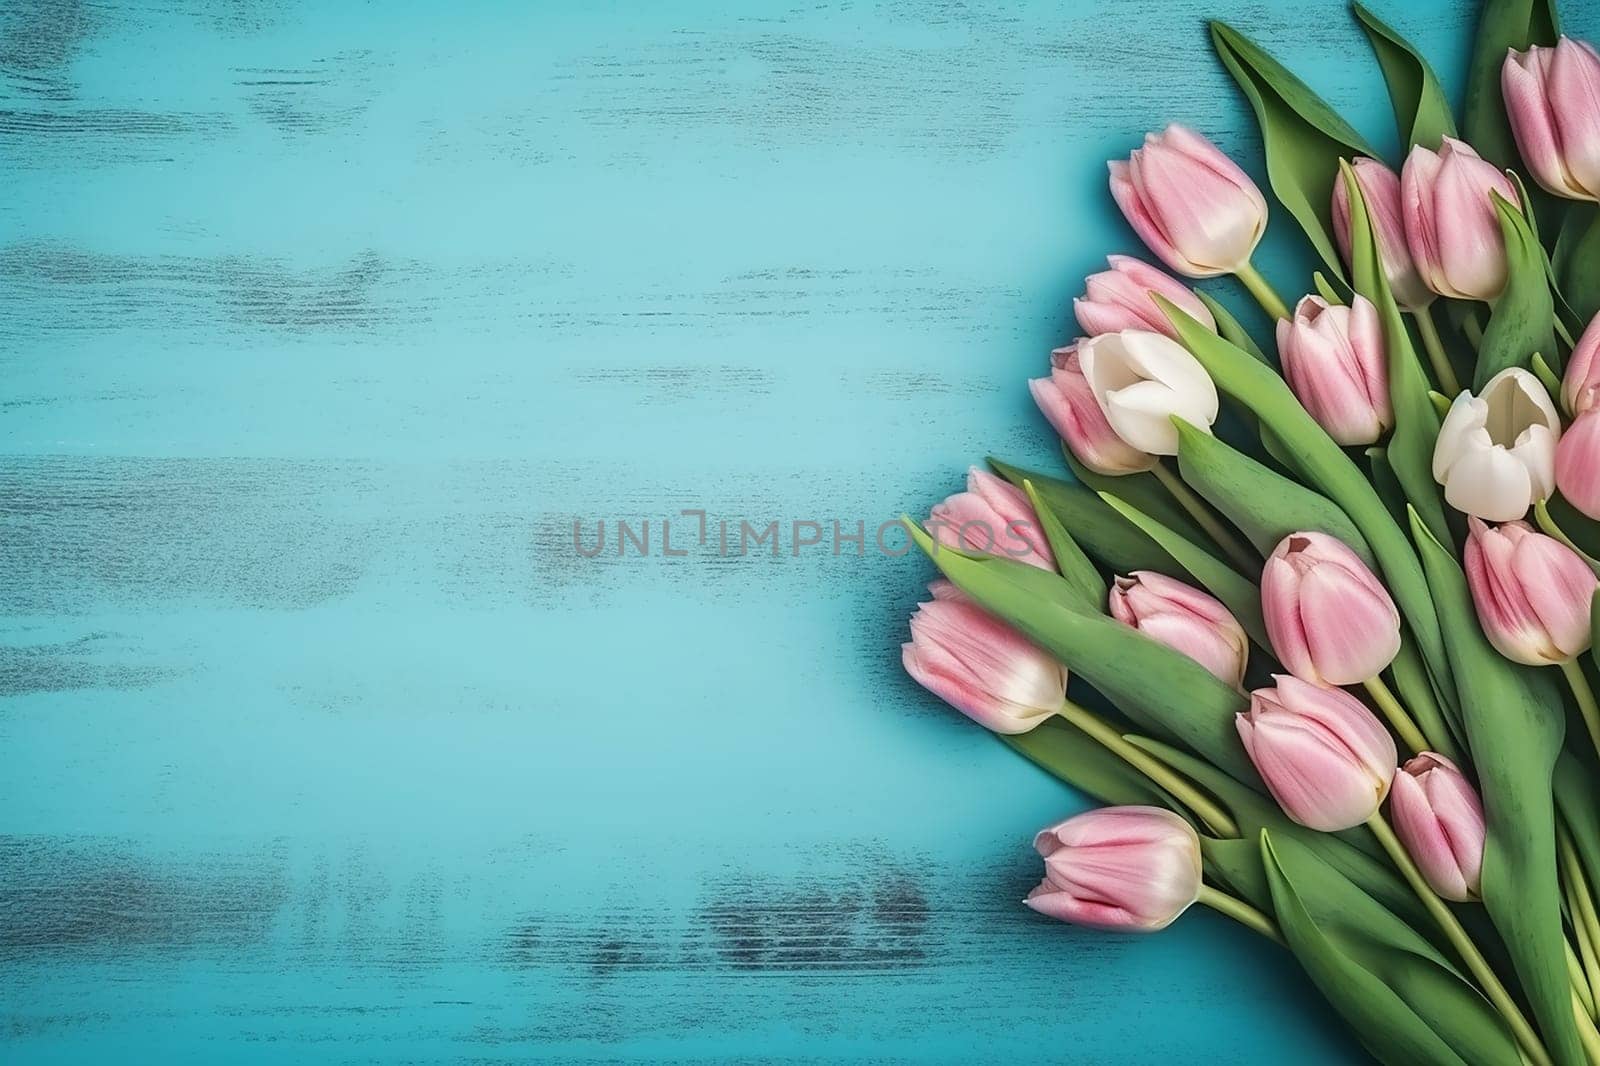 Pink and white tulips arranged on a blue wooden background. by Hype2art